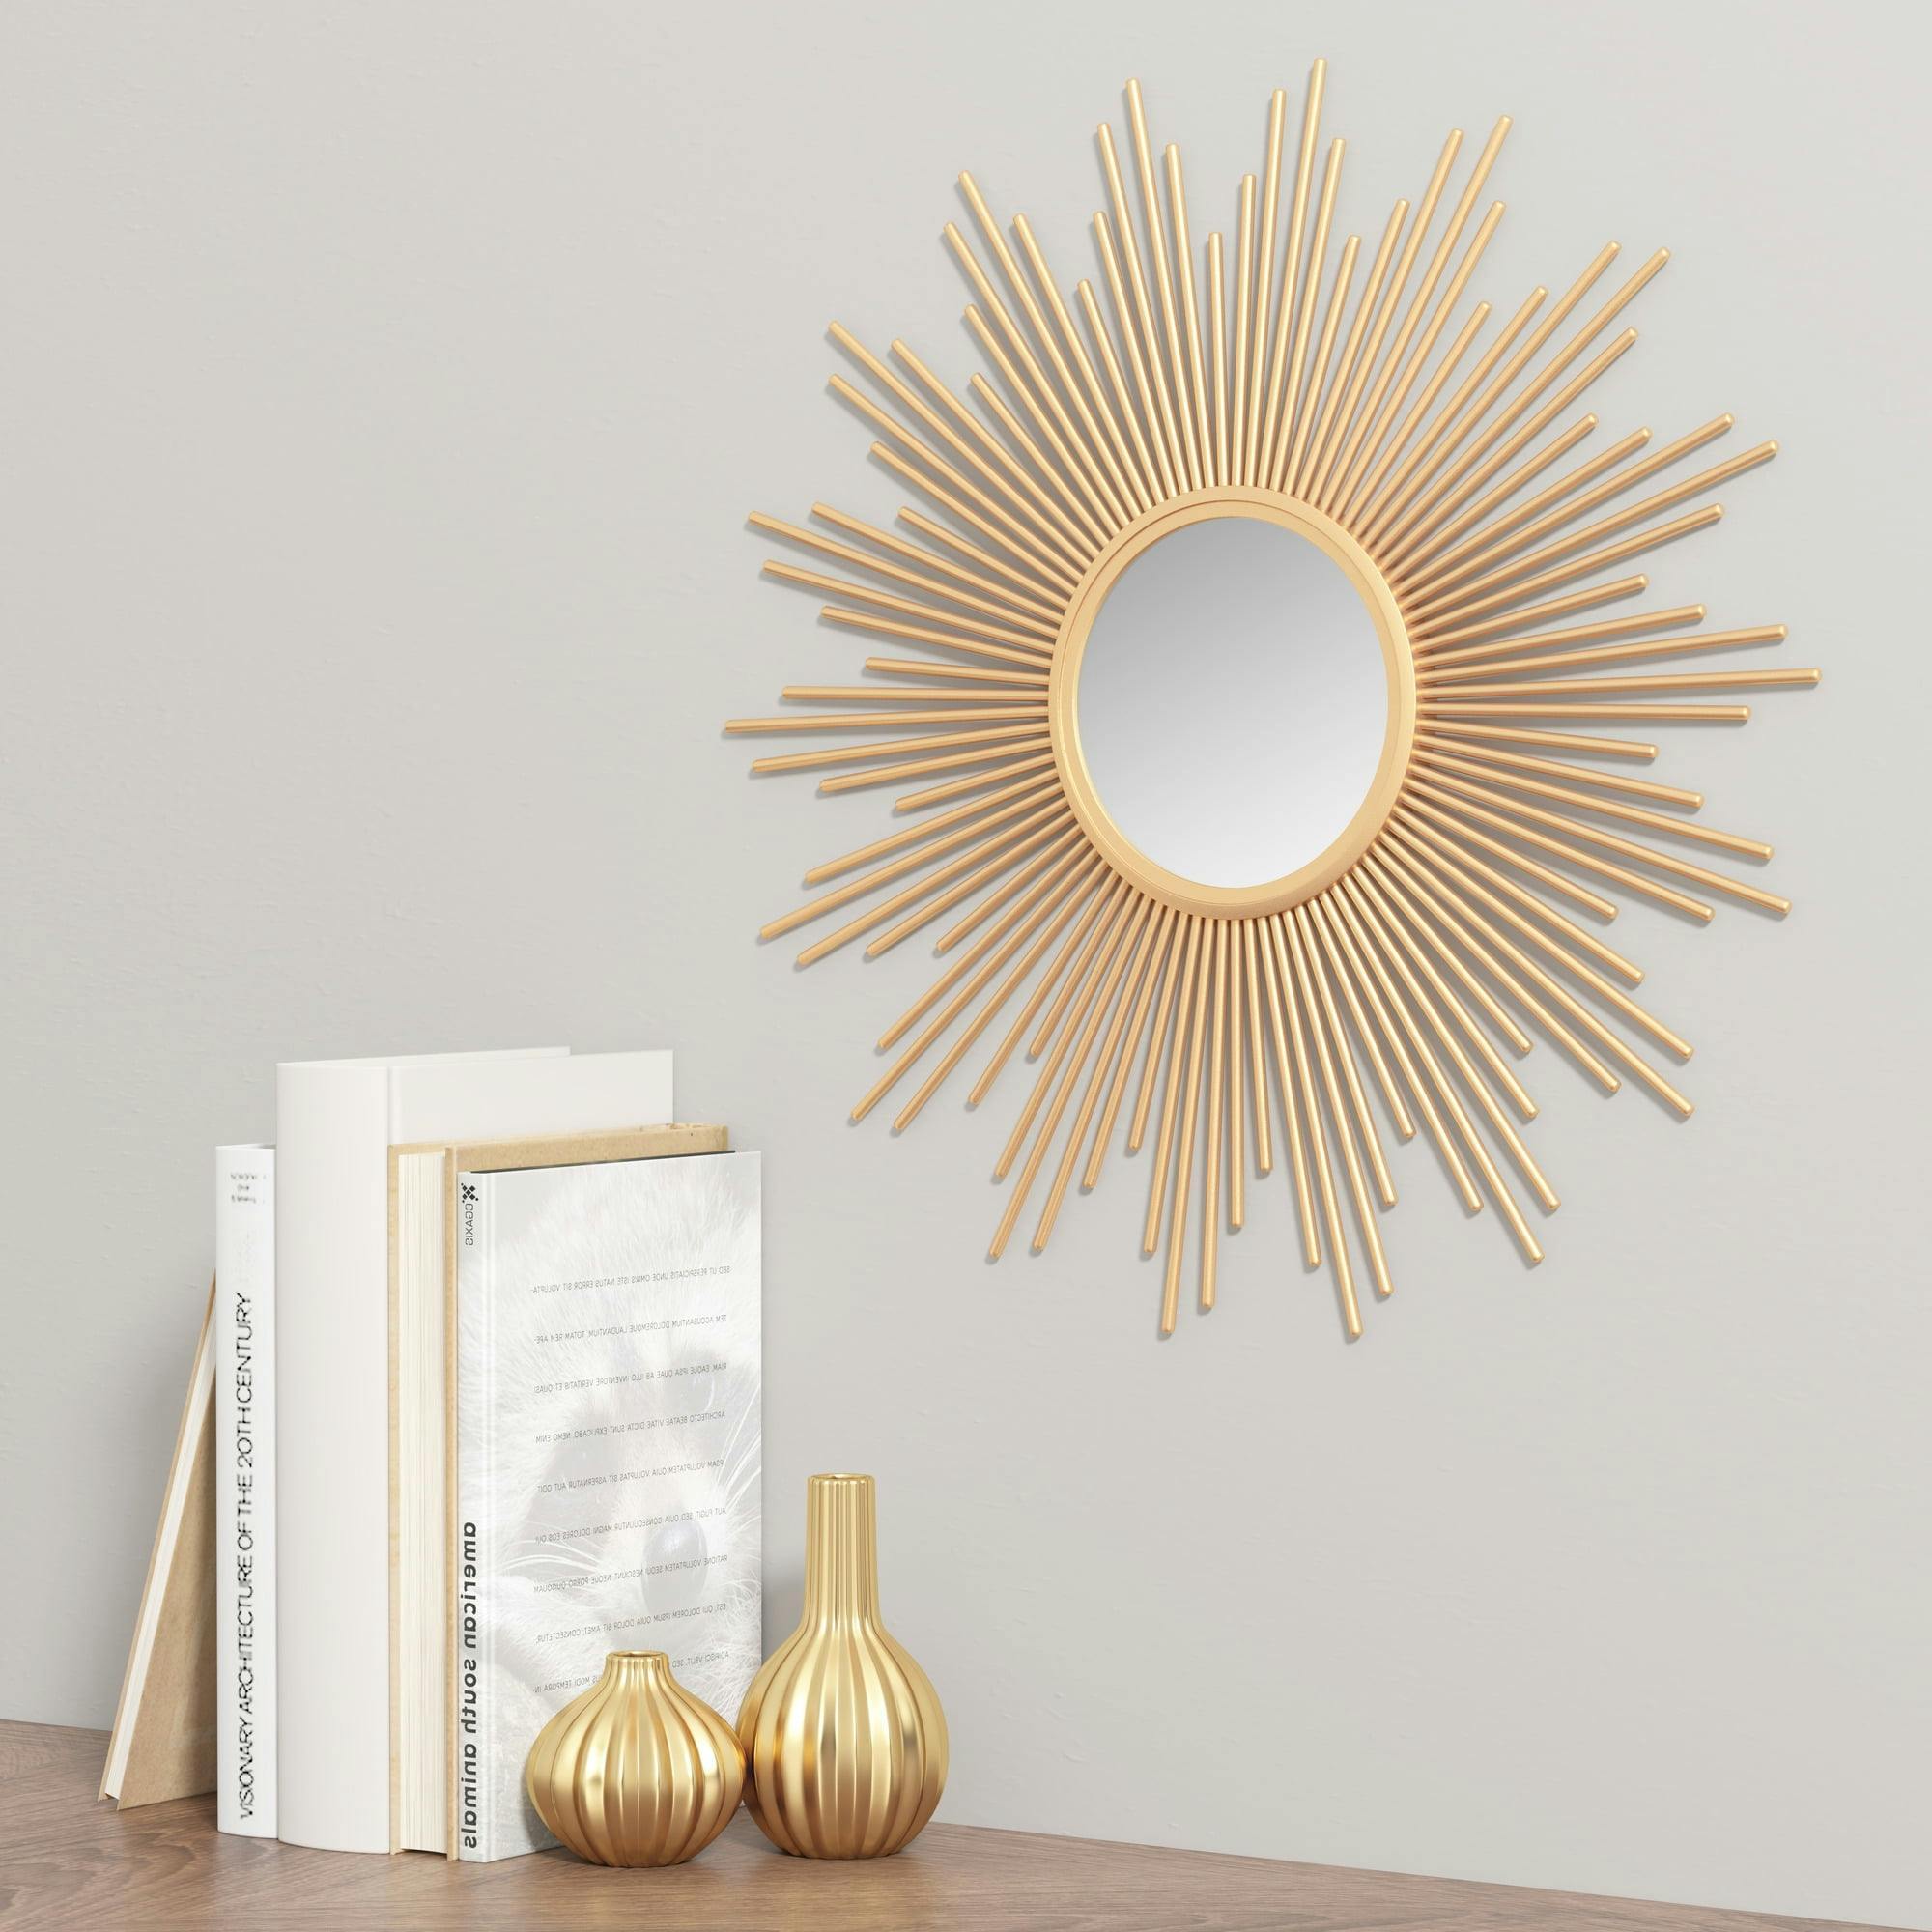 Ecliptic Sphere 14.5" Gold and Silver Sunburst Wall Mirror